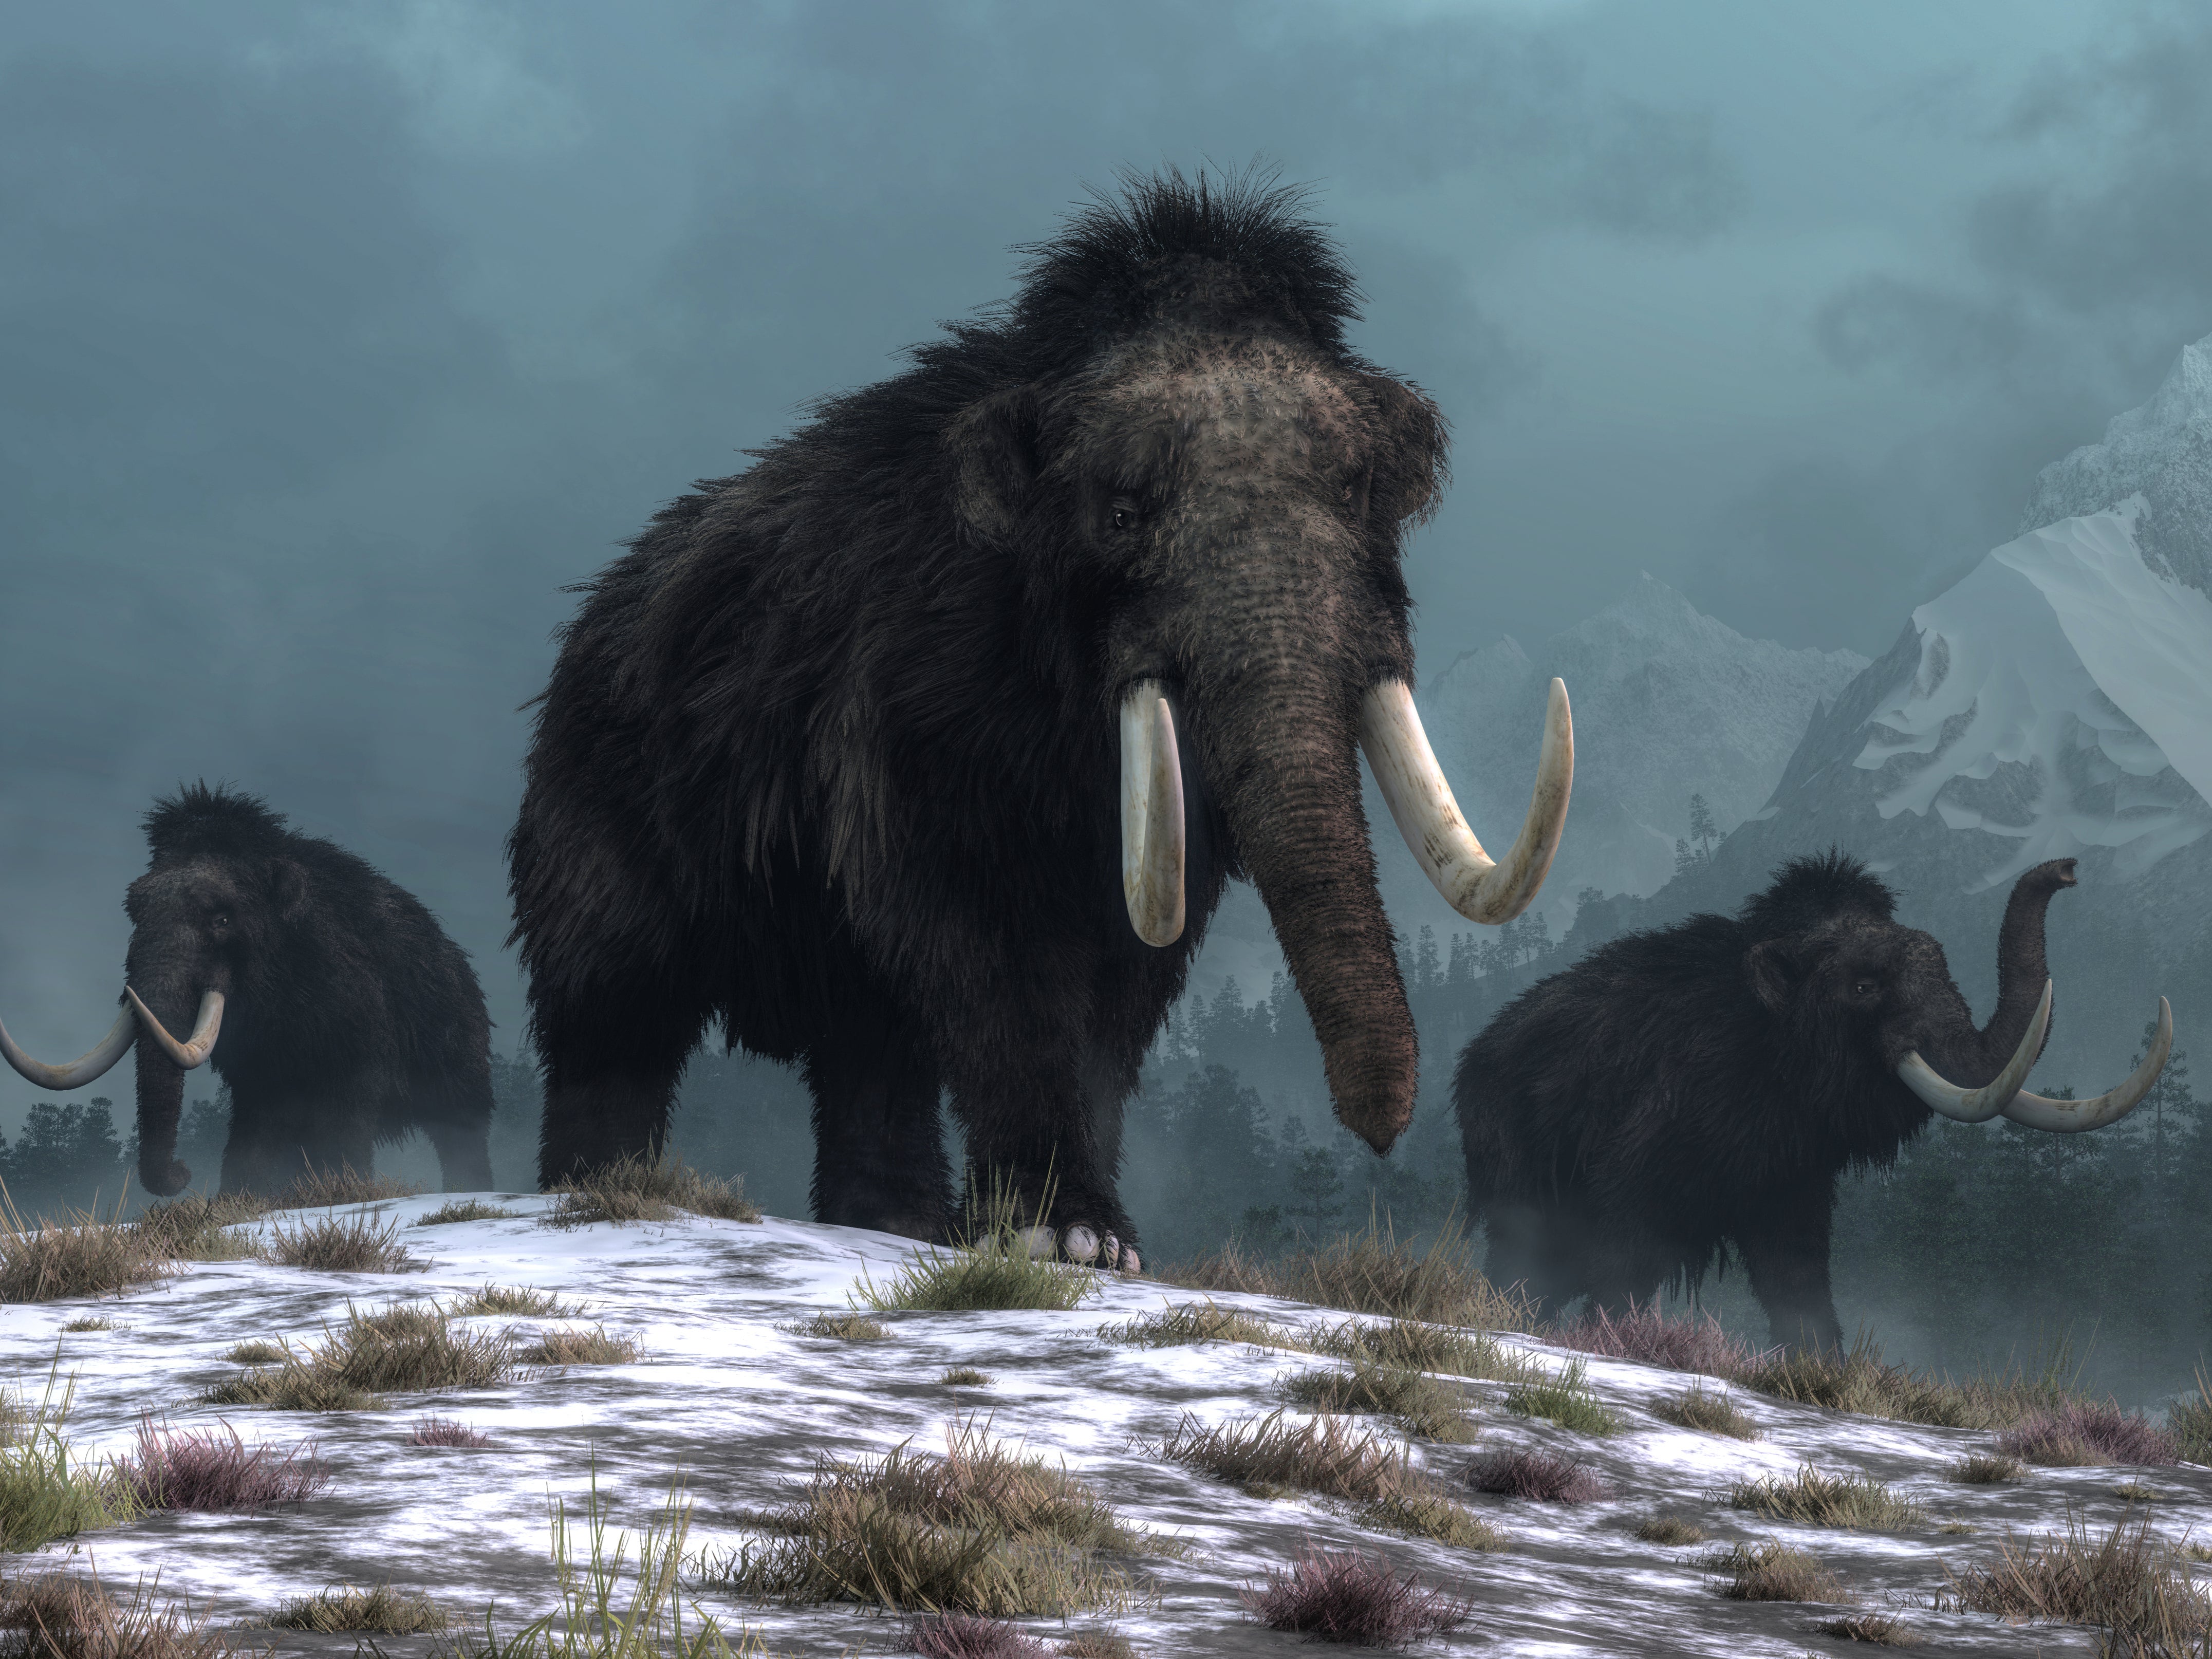 Changes to tundra landscapes due to warming climates left mammoths with little to eat, research suggests